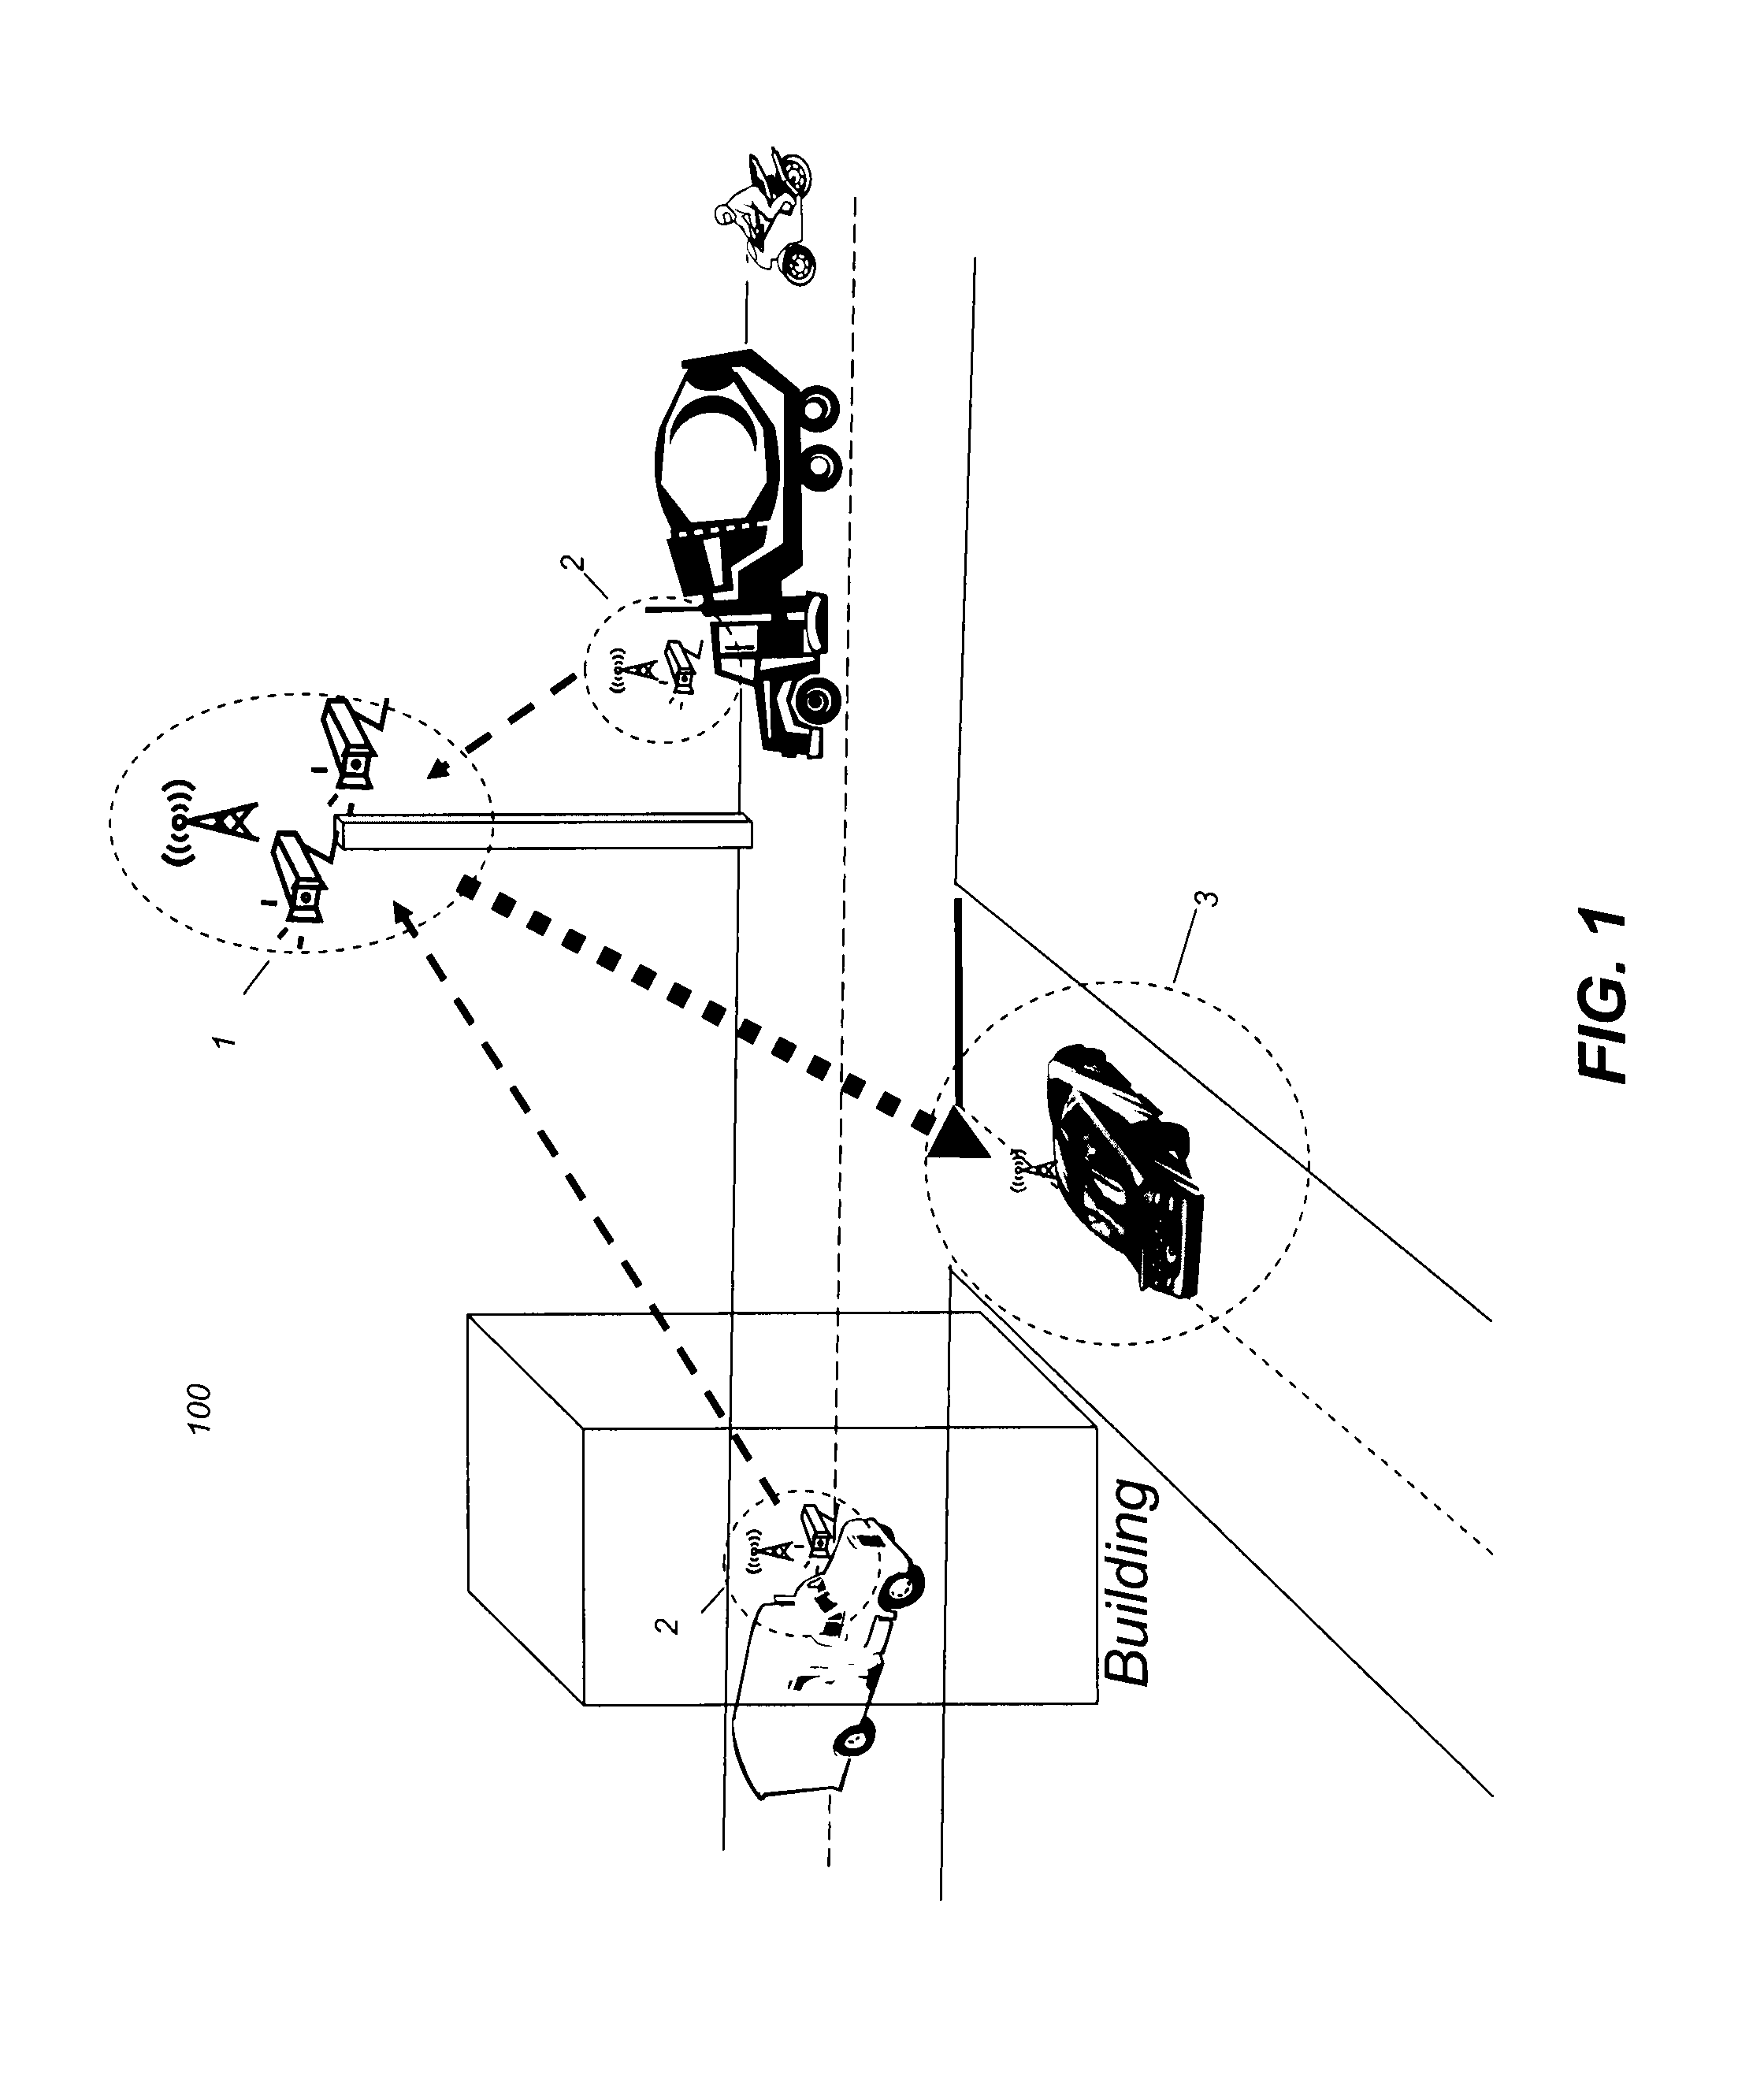 Two-way video and 3D transmission between vehicles and system placed on roadside